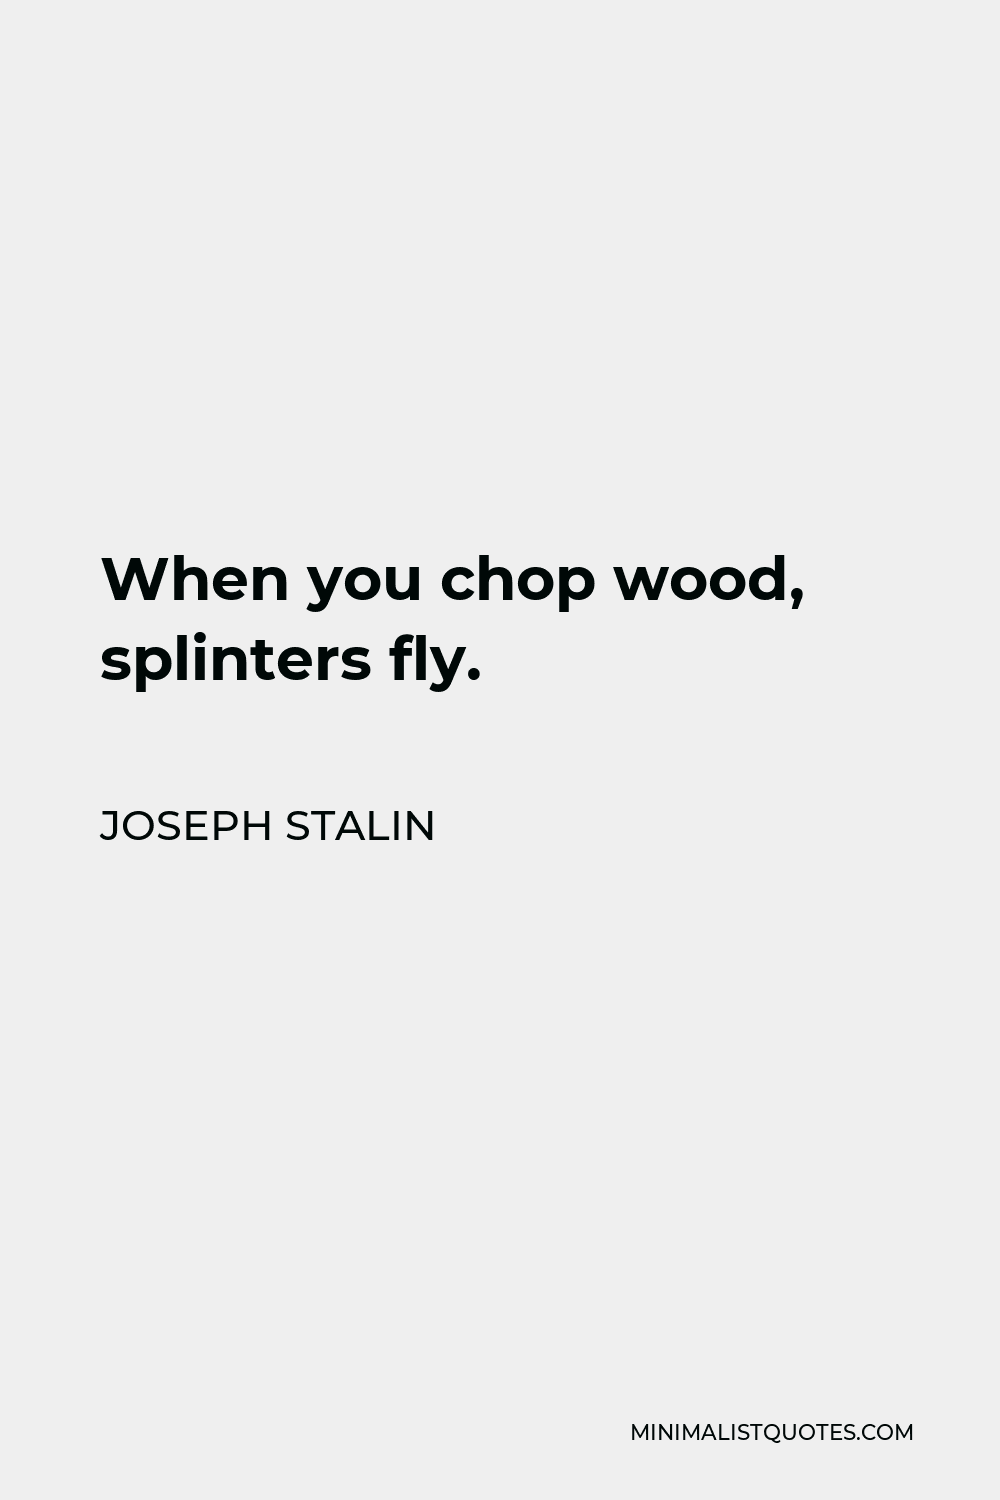 Joseph Stalin Quote - When you chop wood, splinters fly.